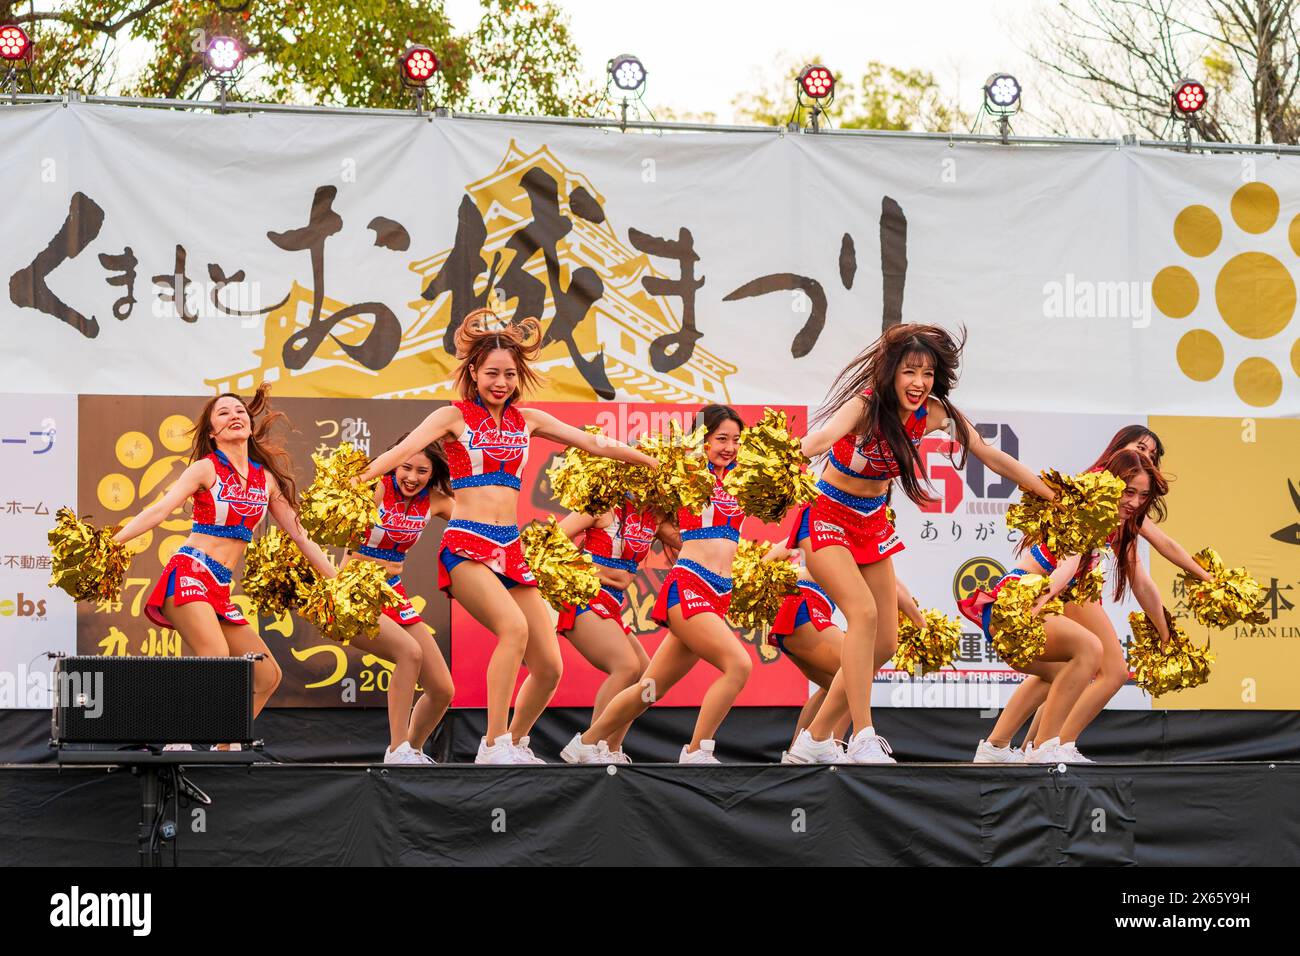 Japanese teenage women cheerleader Yosakoi dancers in tank tops and mini skirts dancing on stage holding gold glittery pom poms at the Kyusyu Gassai. Stock Photo